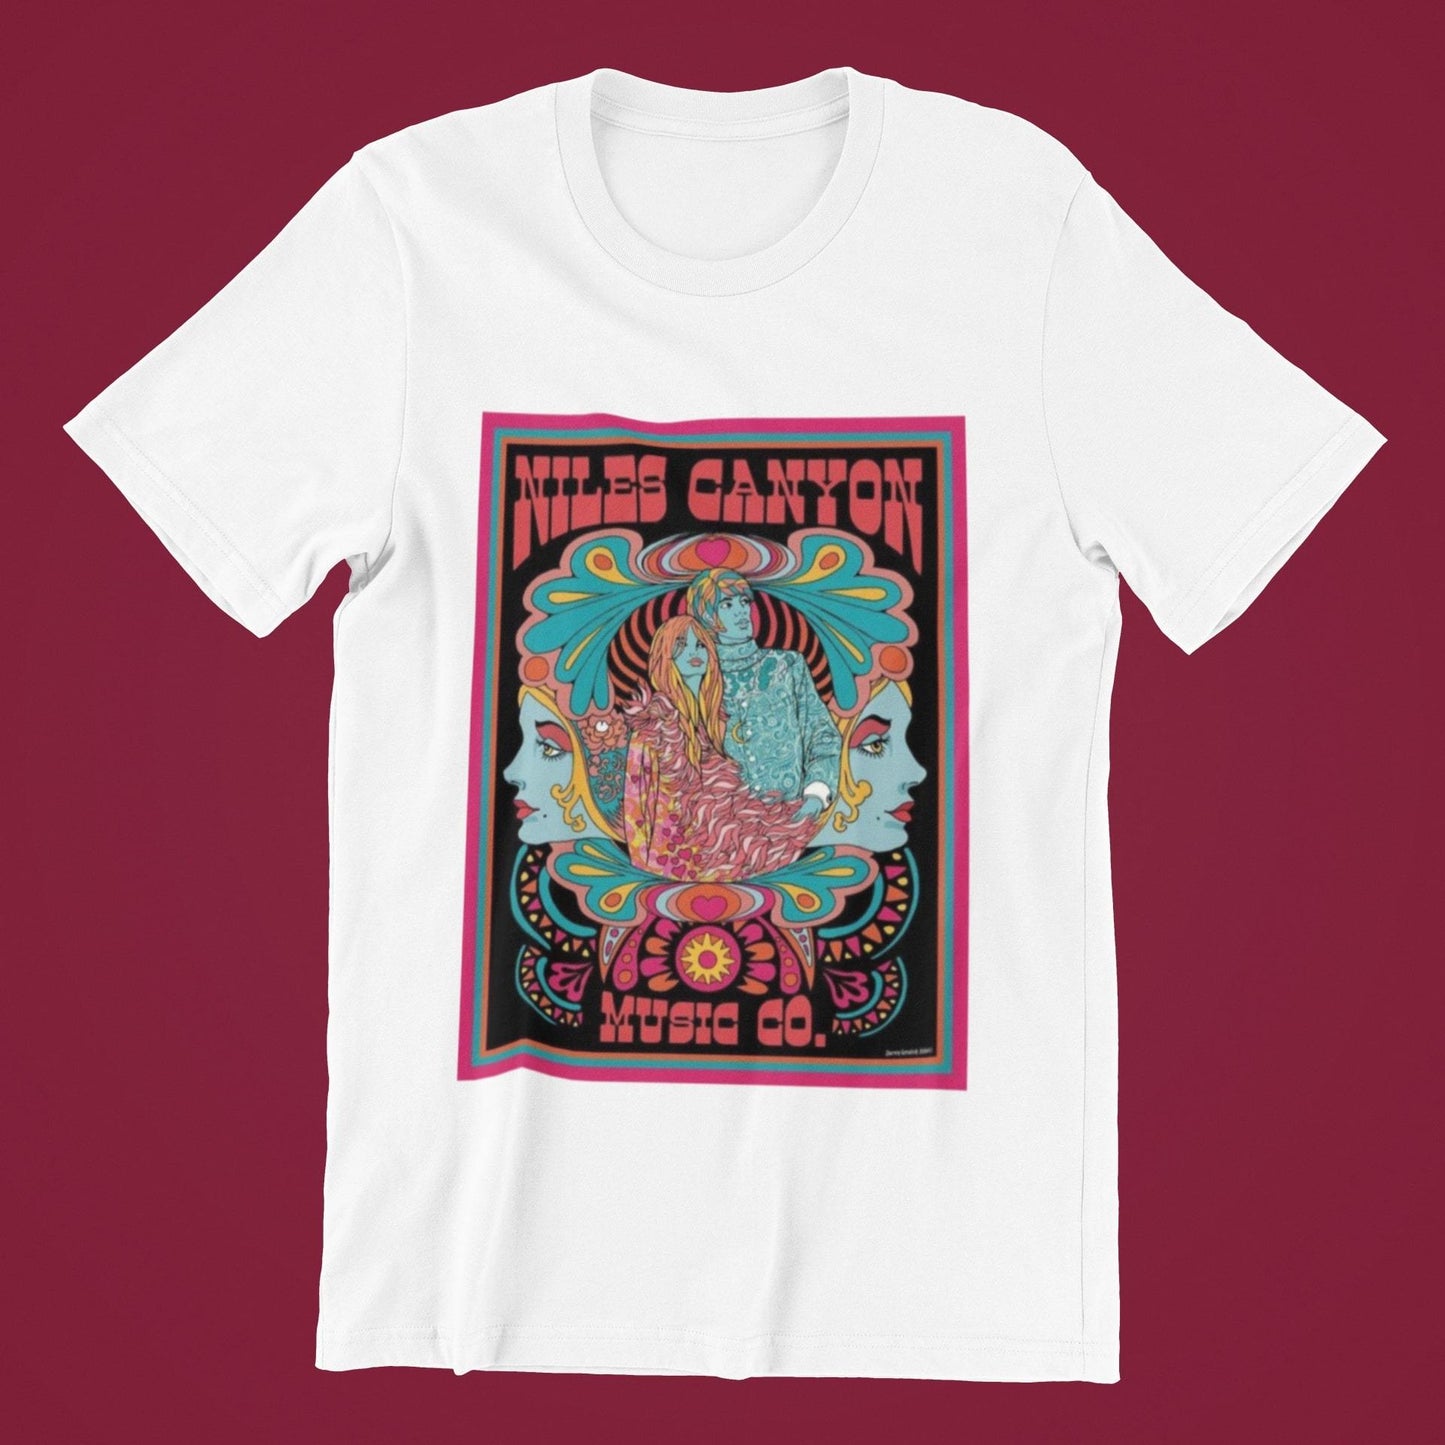 Niles Canyon Psychedelic T shirt for Men - Insane Tees